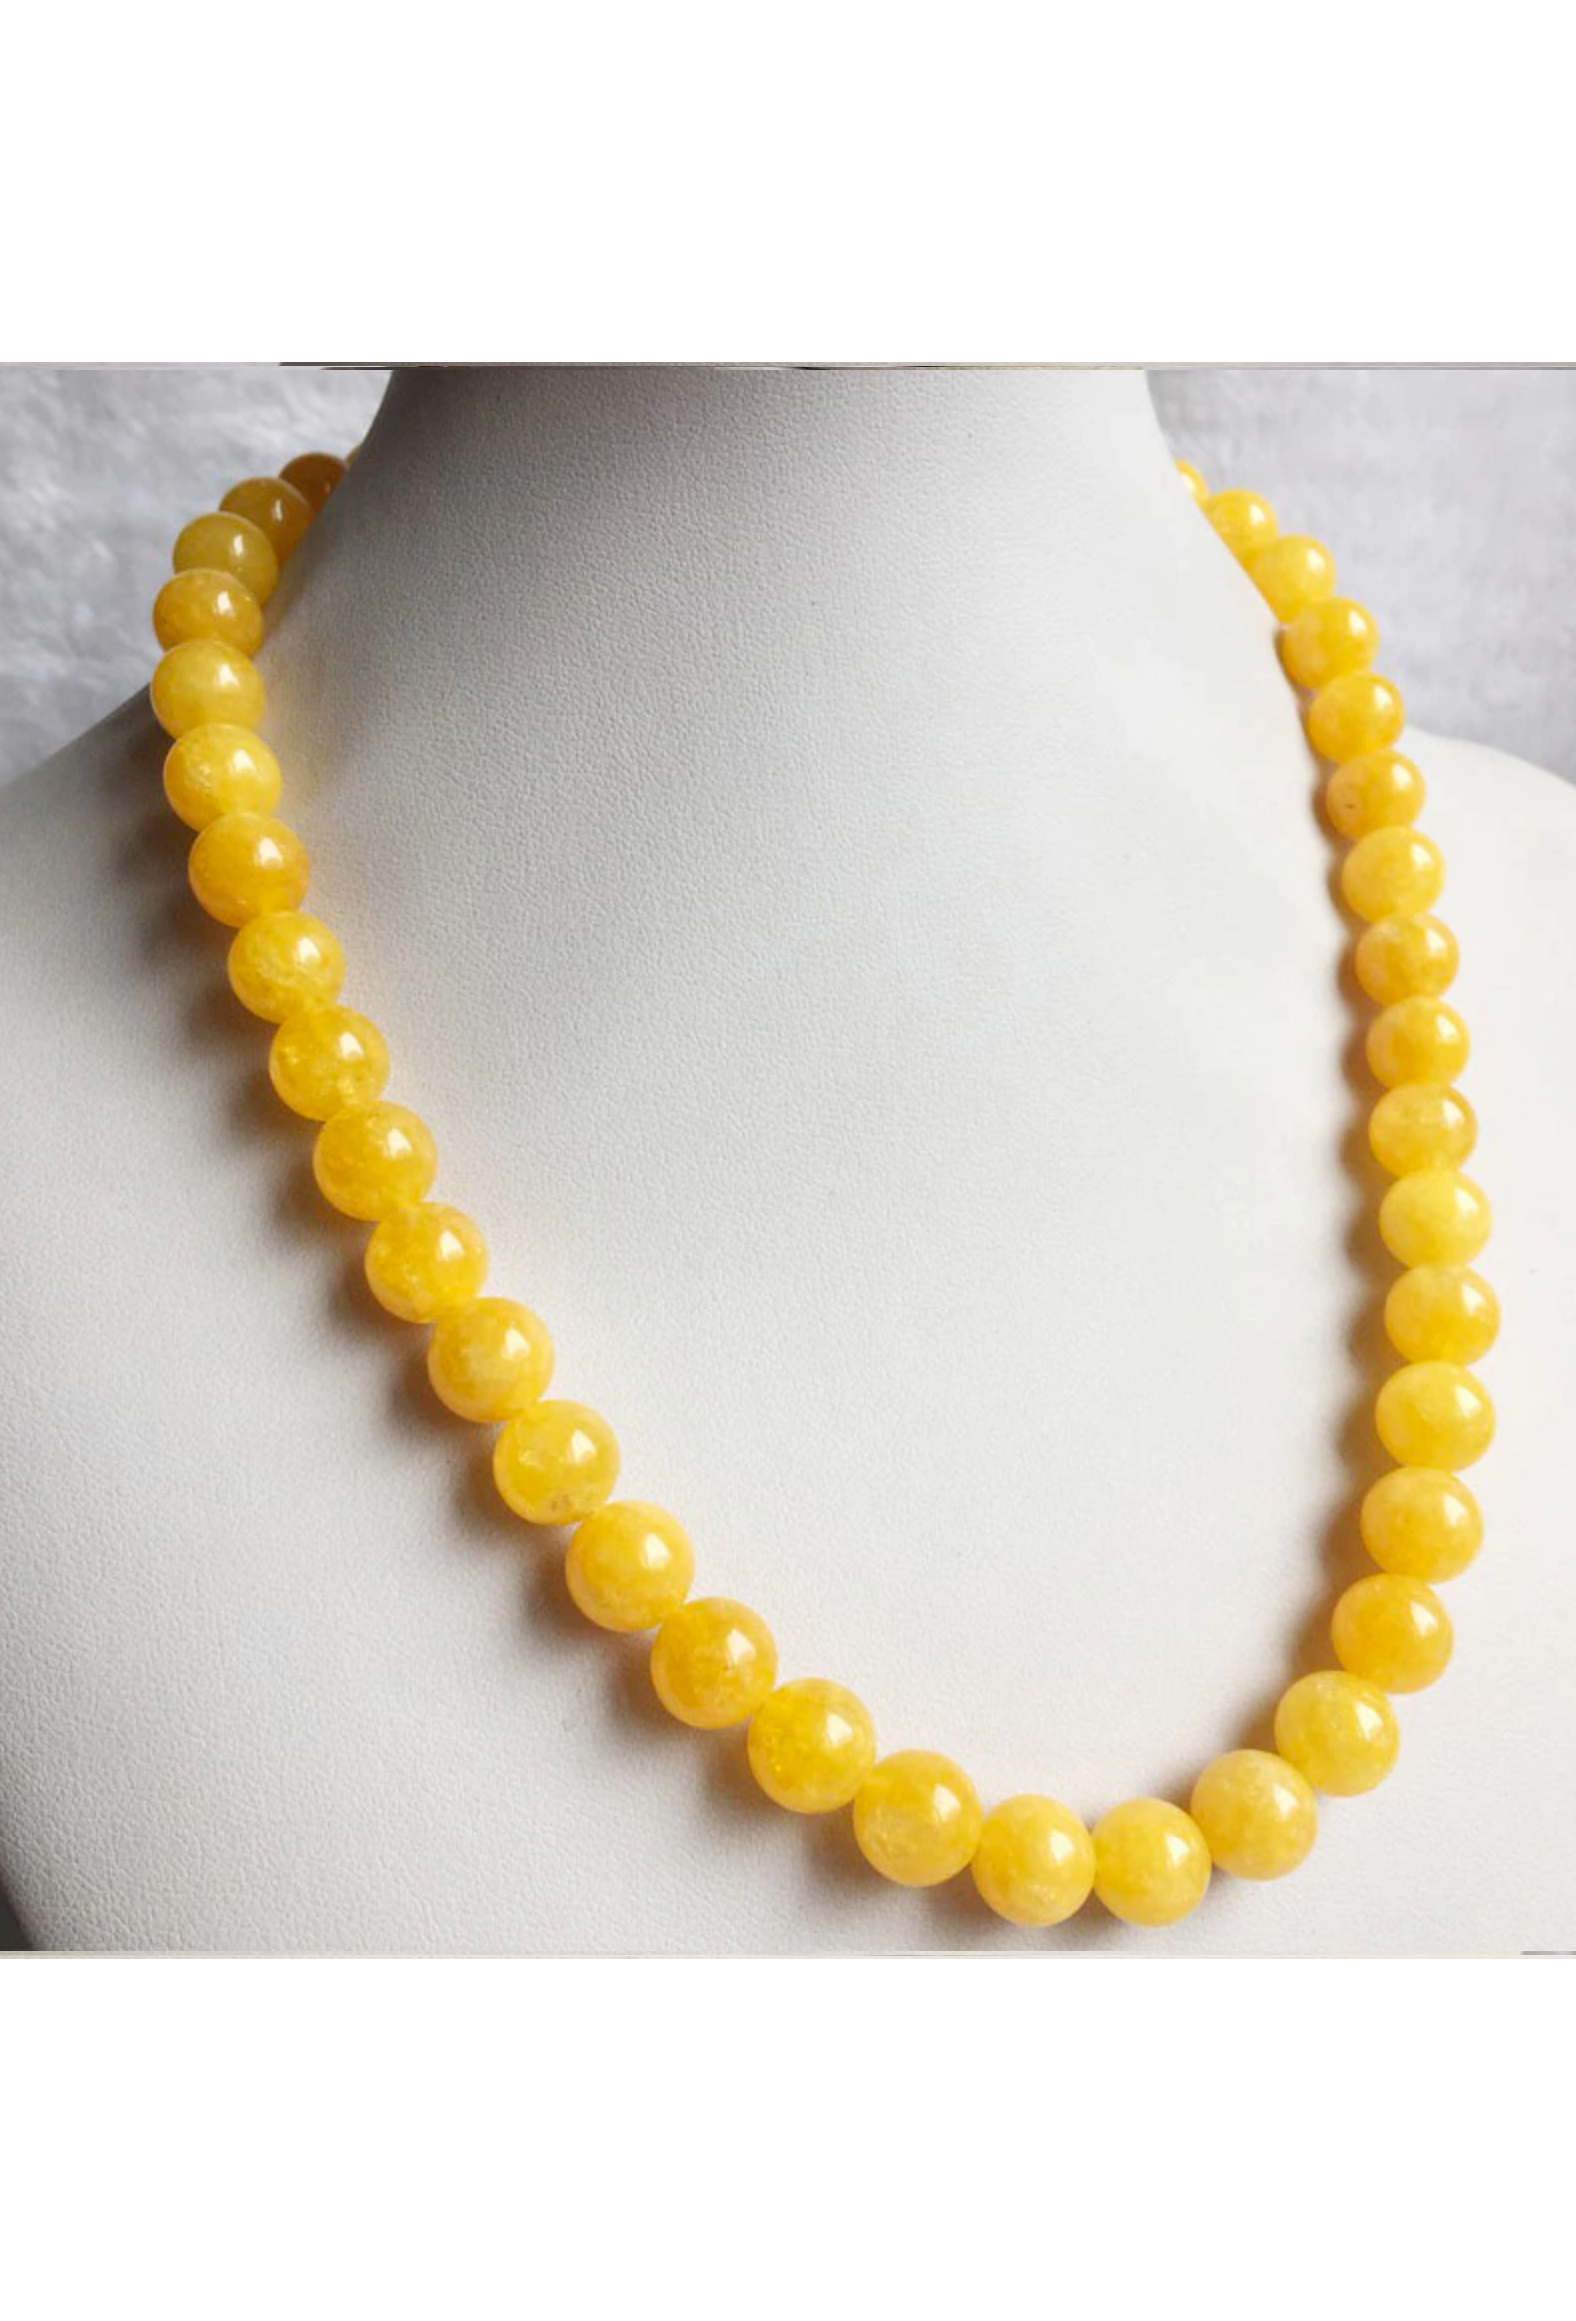 The Beeswax Necklace - J. Marin